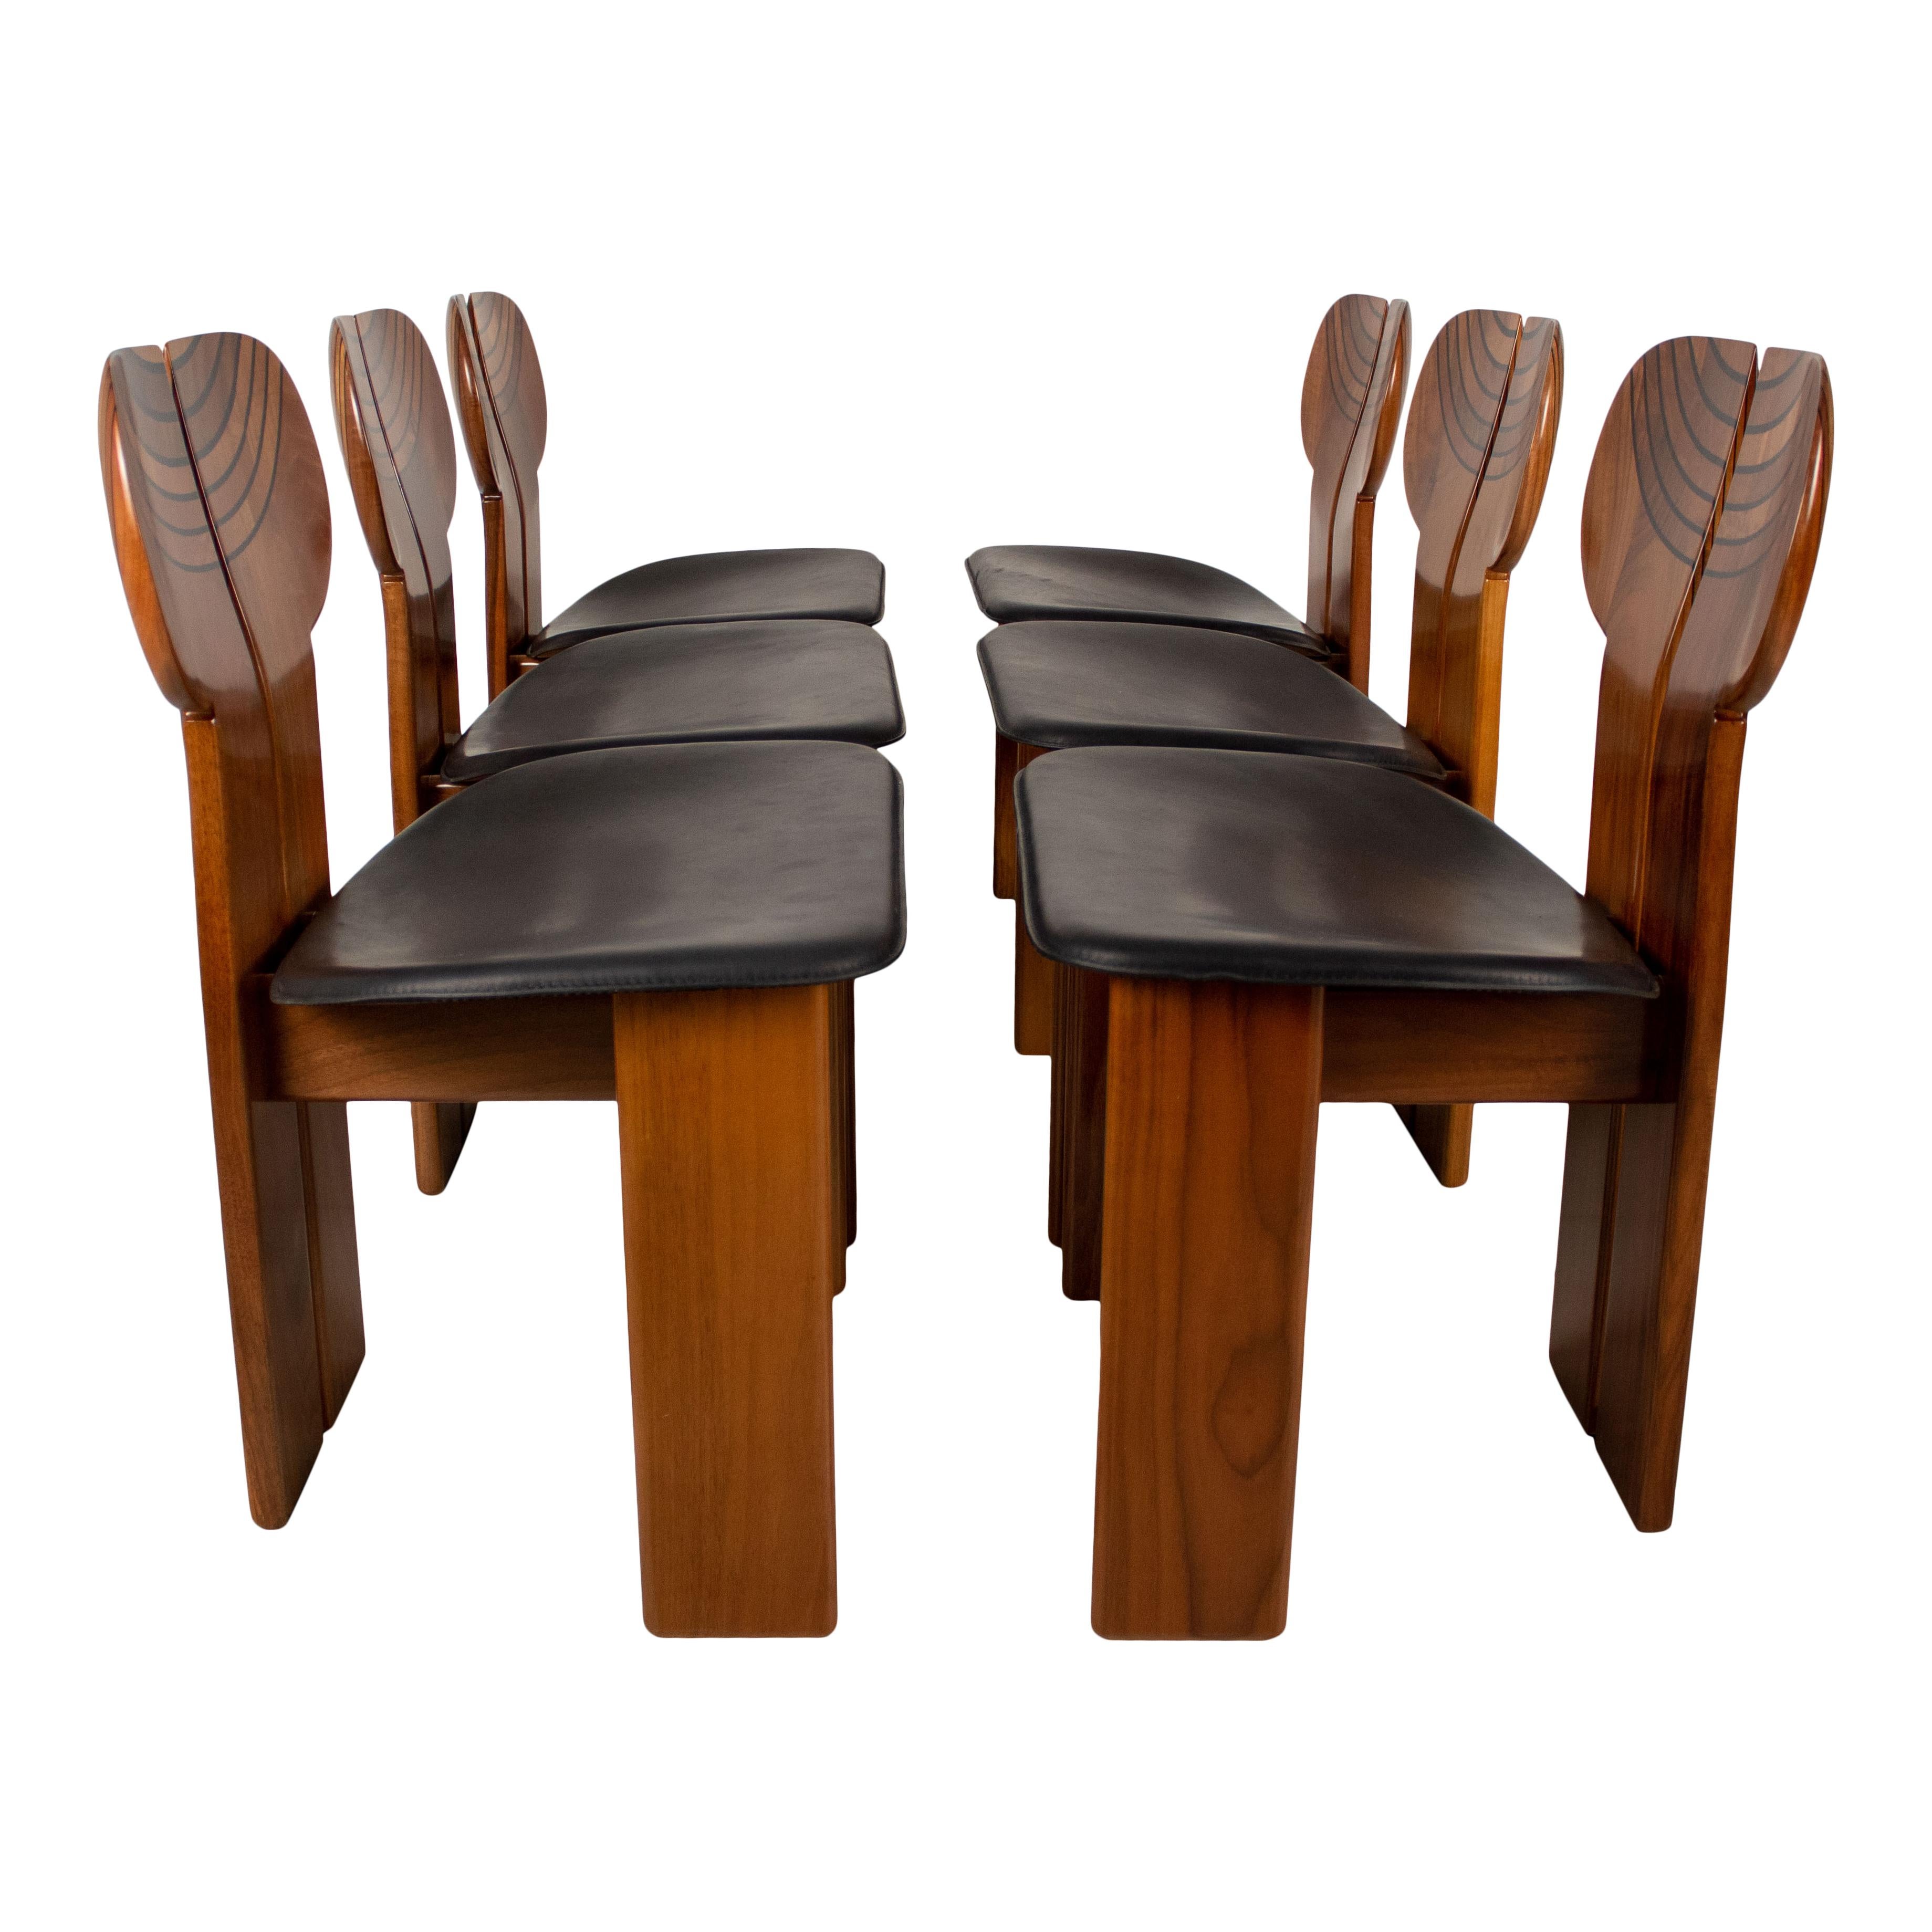 Afra and Tobia Scarpa Walnut Africa Dining Chair for Maxalto, 1976, Set of 6 For Sale 2